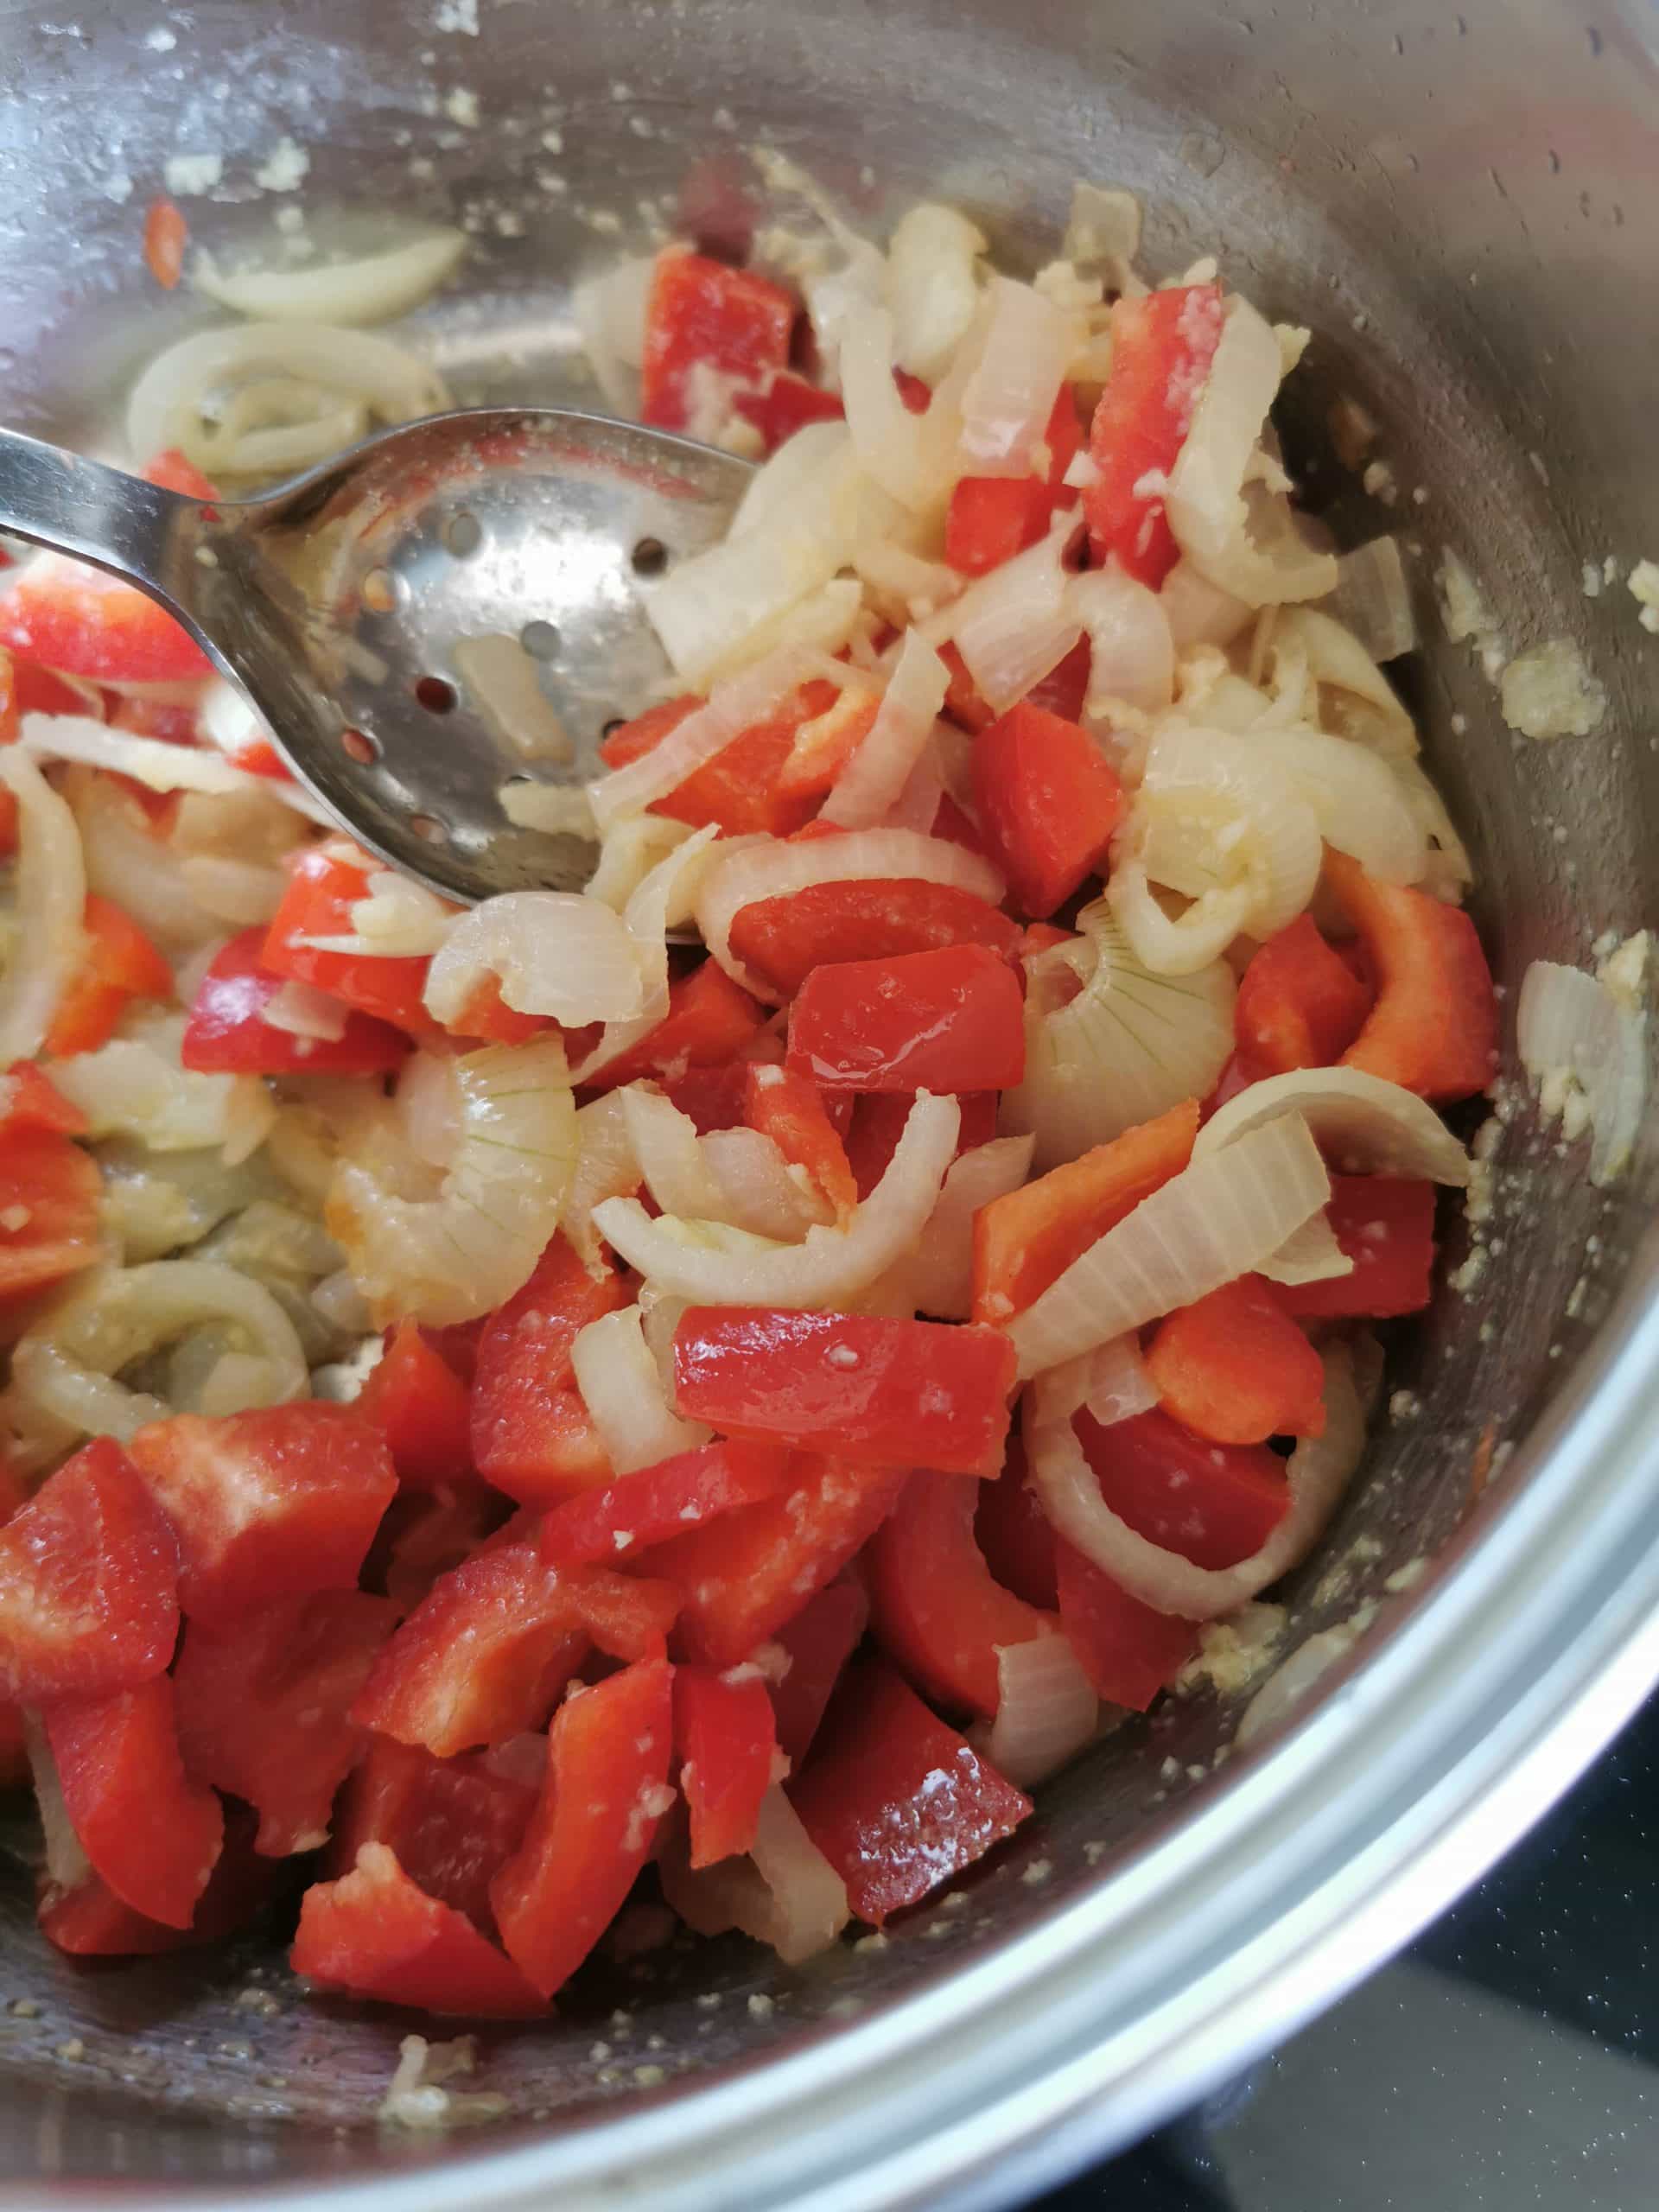 Onions, garlic, ginger and red bell peppers cooking in a frying pan 